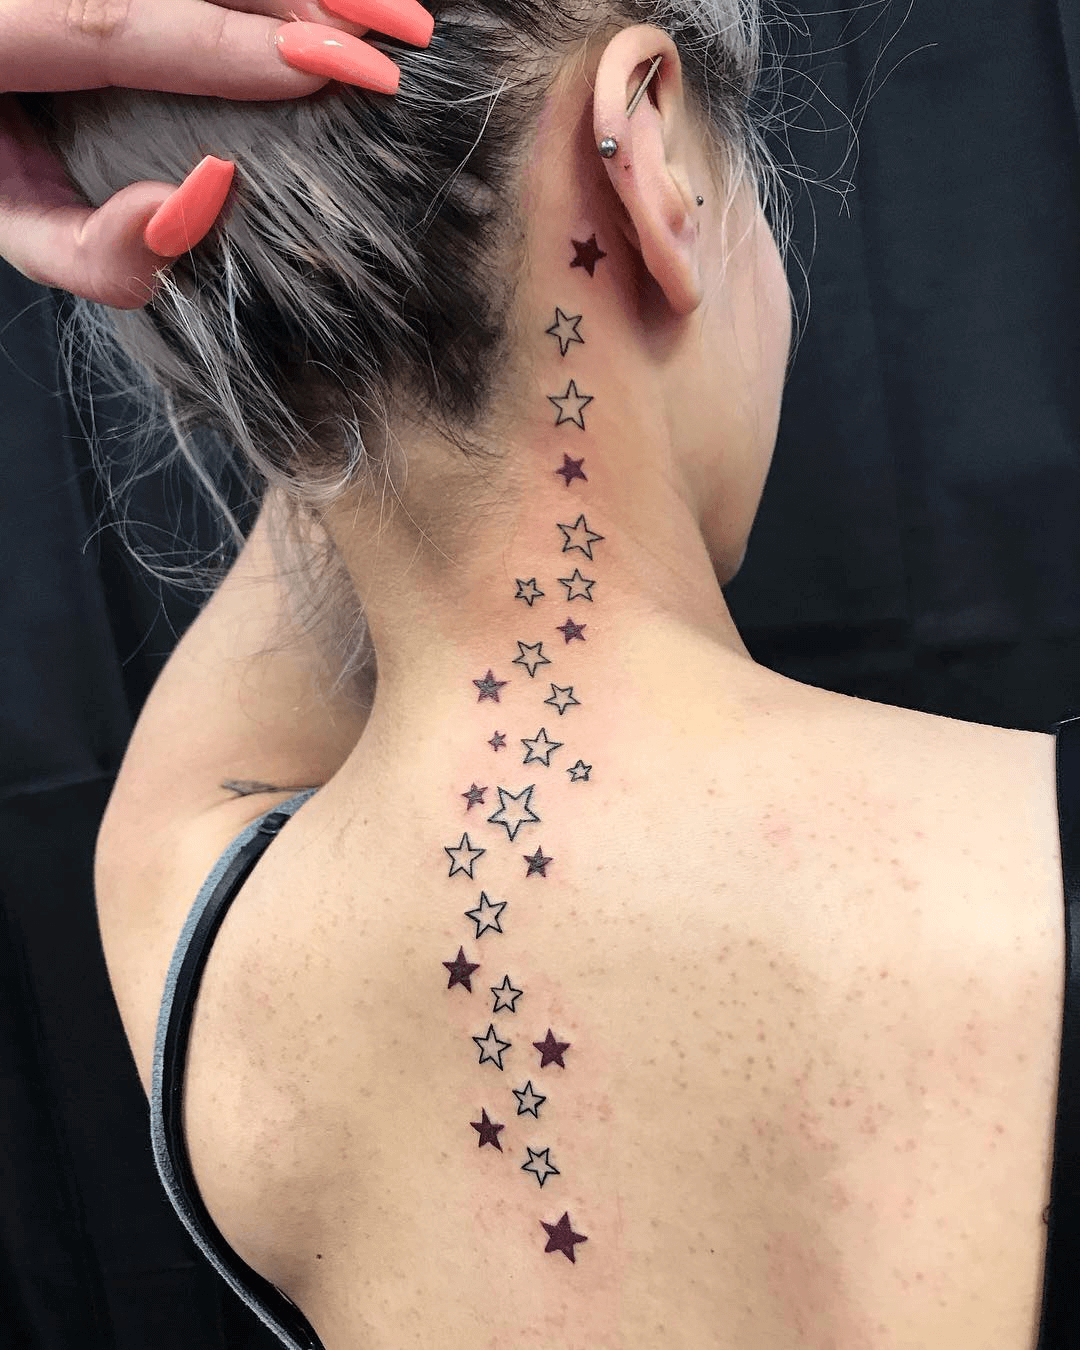 220 Celebrity Minimalist Tattoos | Page 16 of 22 | Steal Her Style | Page 16